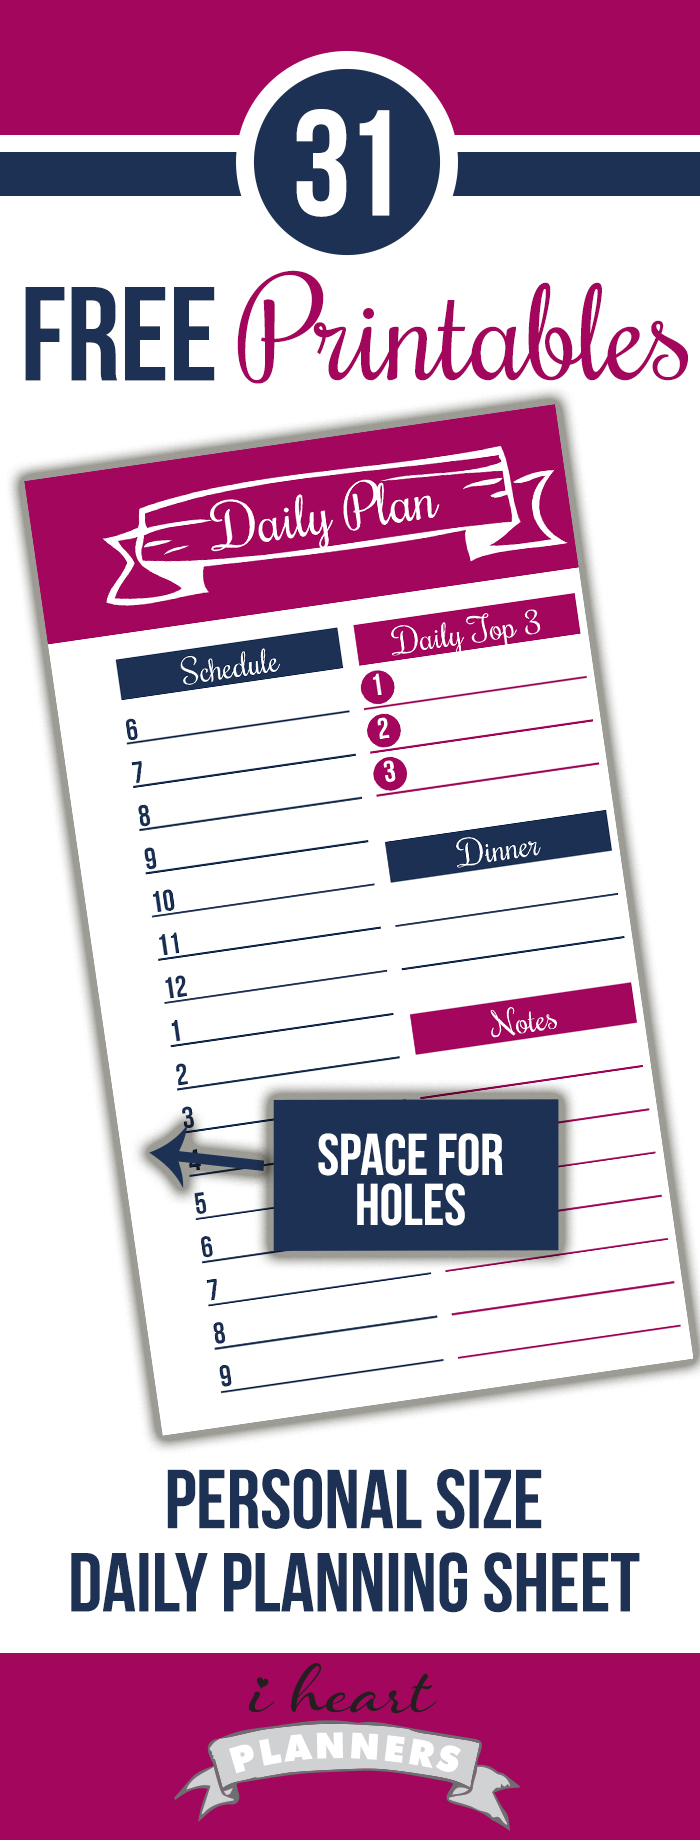 Personal Filofax size daily planning sheet. It's so hard to find printables to fit the Personal filofax (especially free printables), so it's great to have this daily planner sheet.